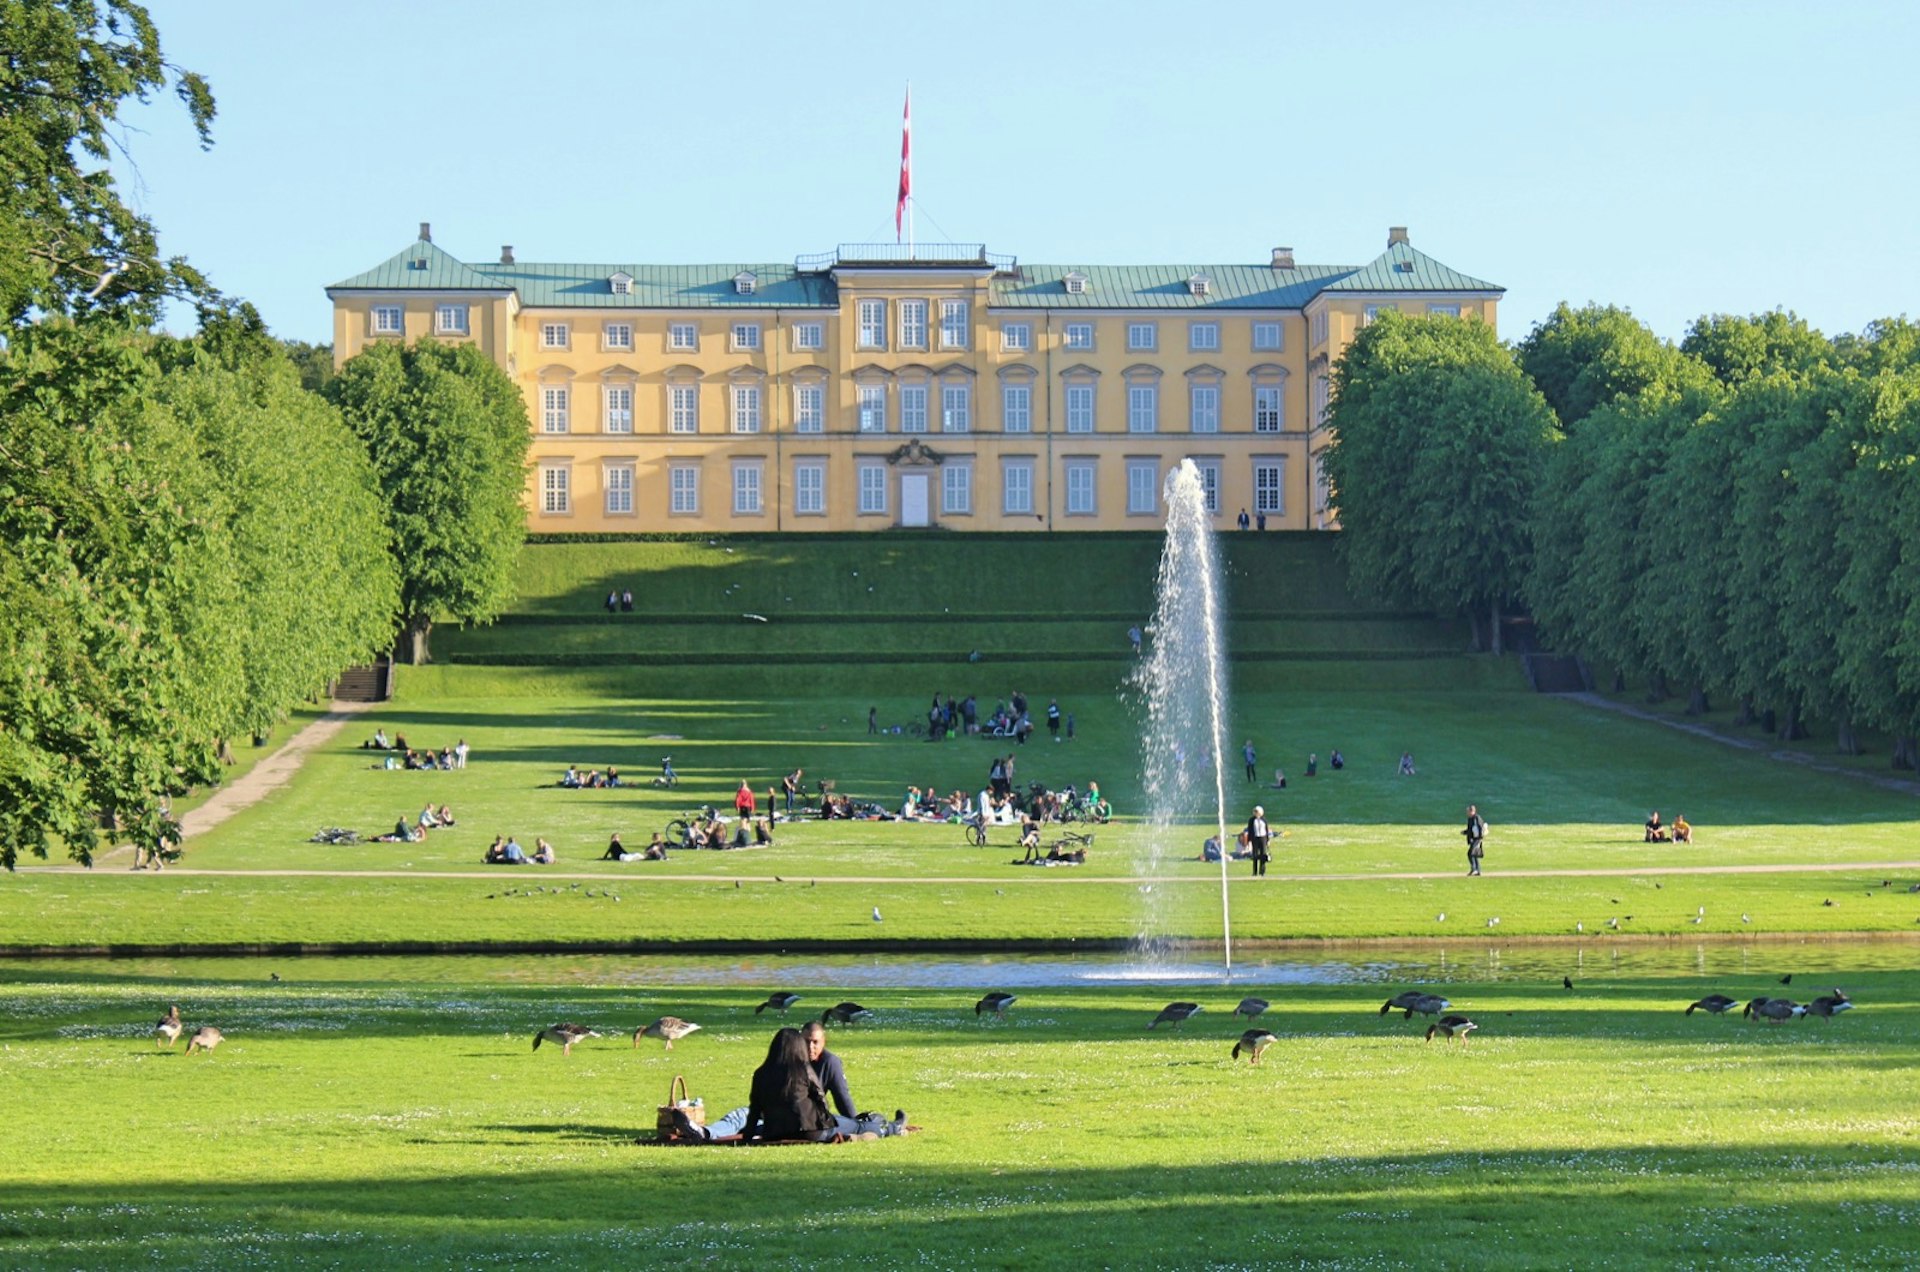 Groups of people sit scattered along the expansive grassy lawn and fountain in front of Frederiksberg Castle at Frederiksberg Have. The garden sits on 32-hectares of land. 